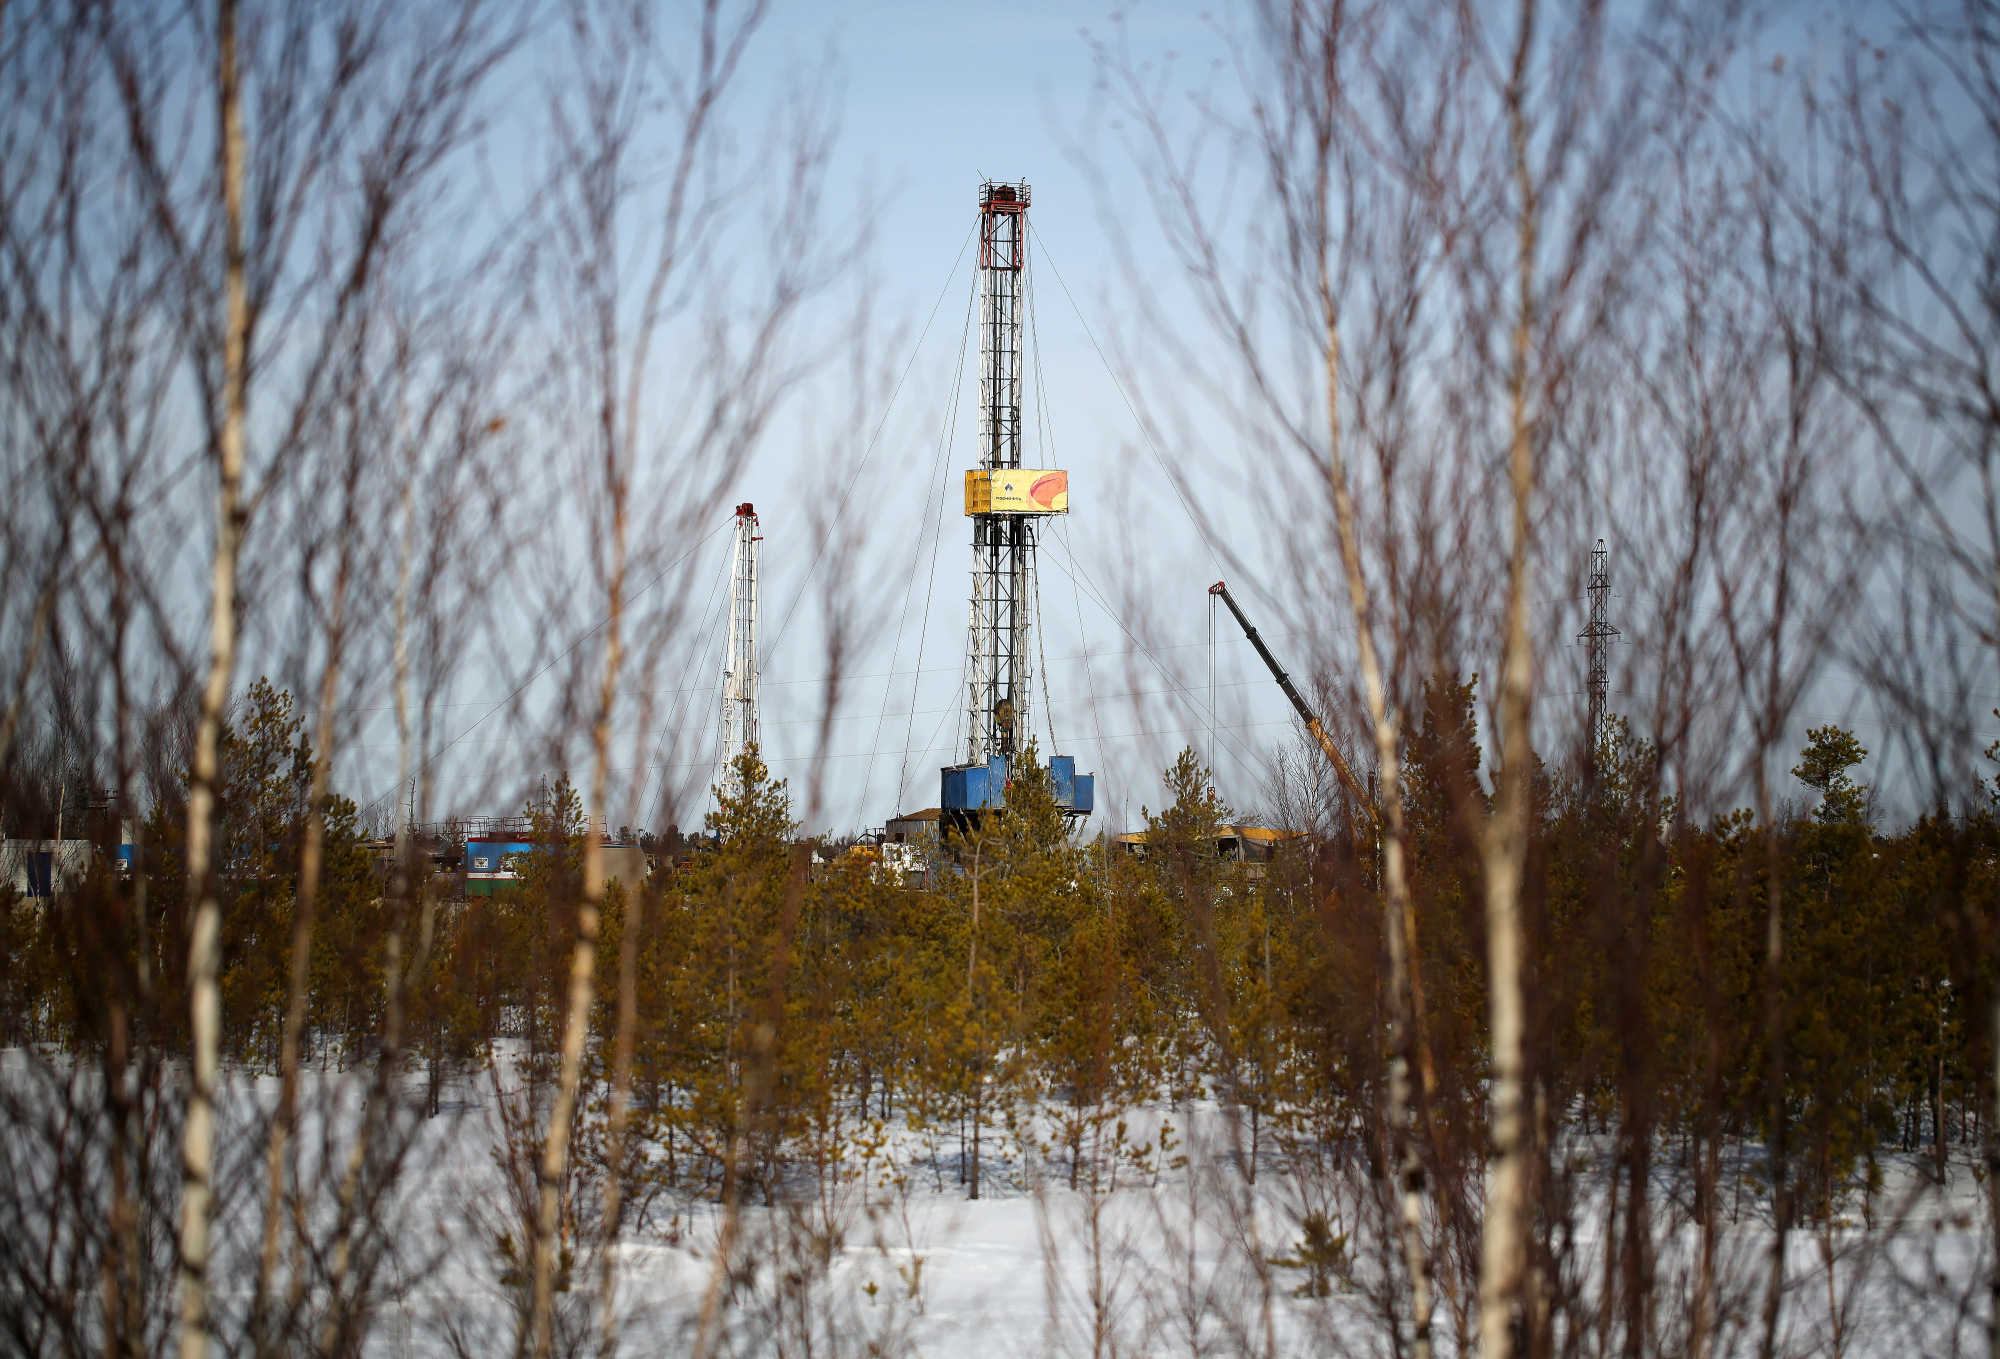 A drilling rig stands in an oilfield in Russia. Photographer: Andrey Rudakov/Bloomberg